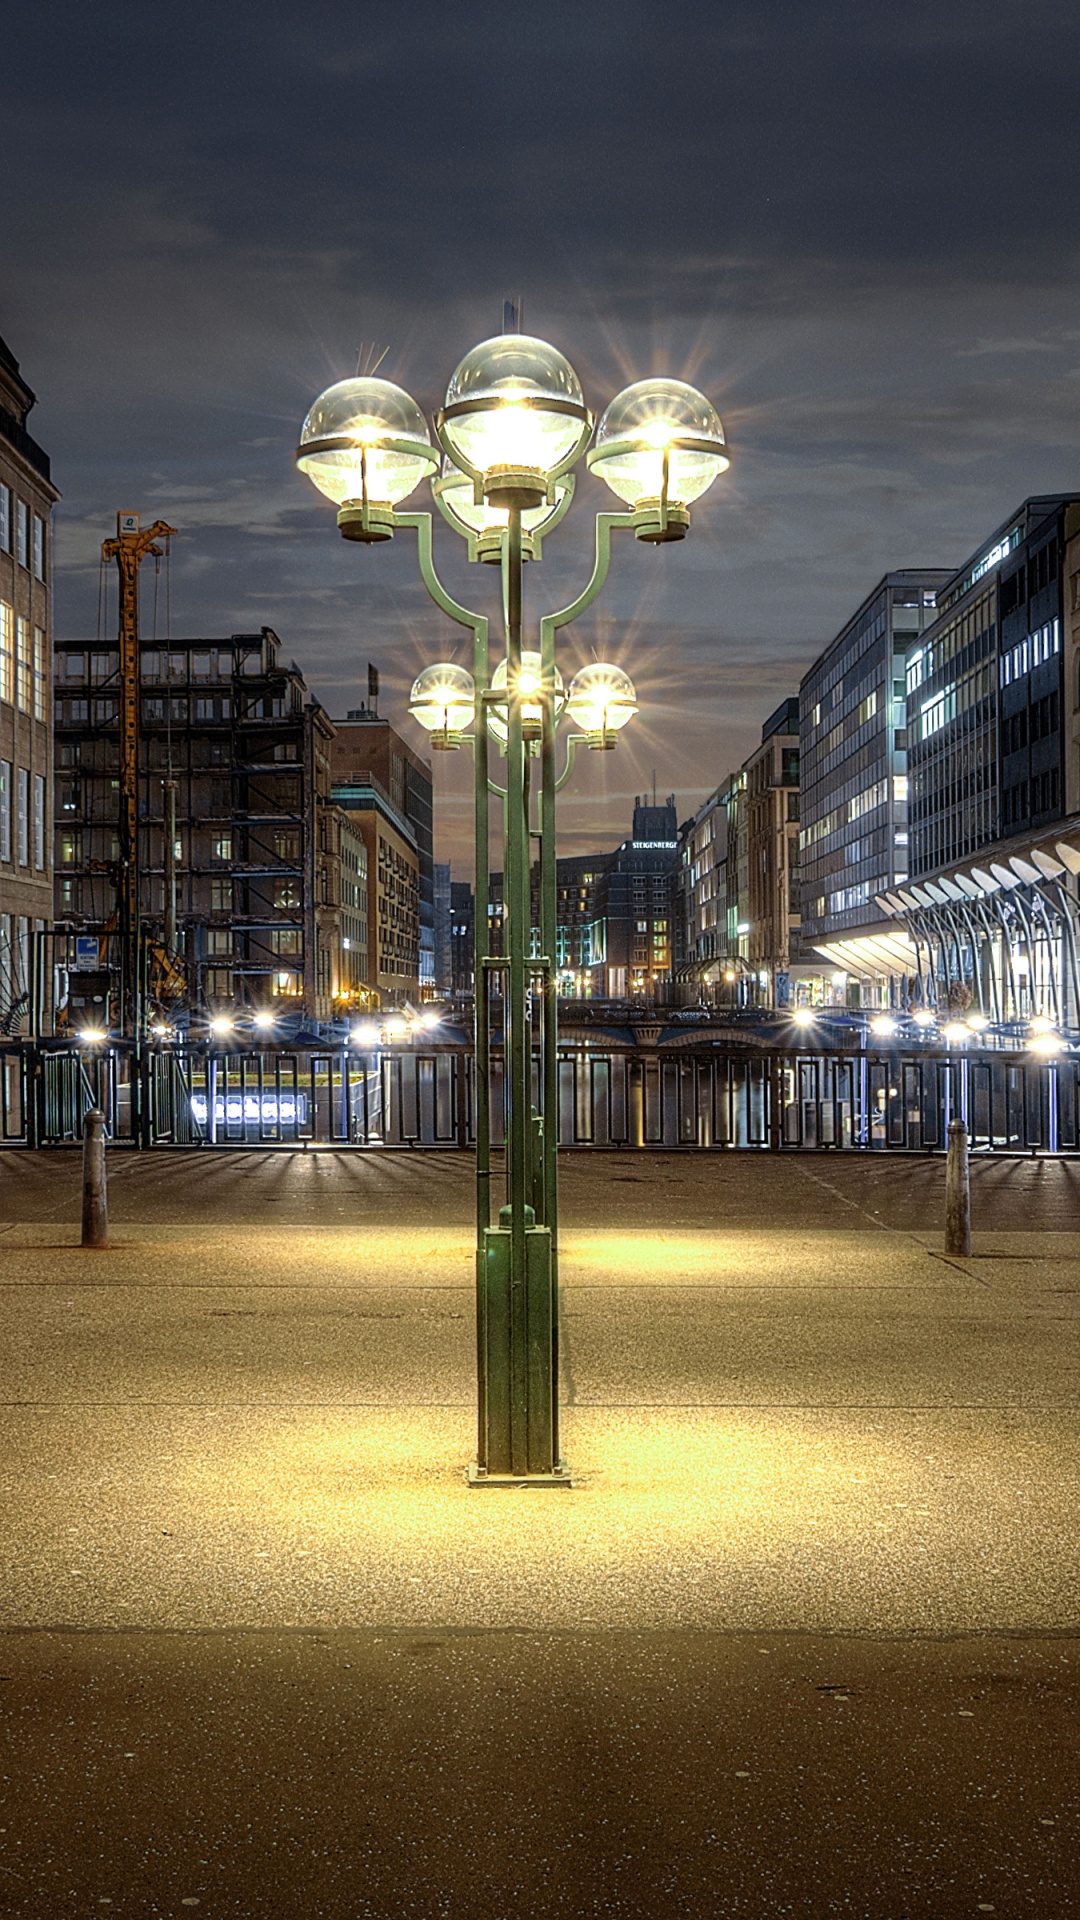 Lighted Street Lights in The Middle of The City During Night Time. Wallpaper in 1080x1920 Resolution